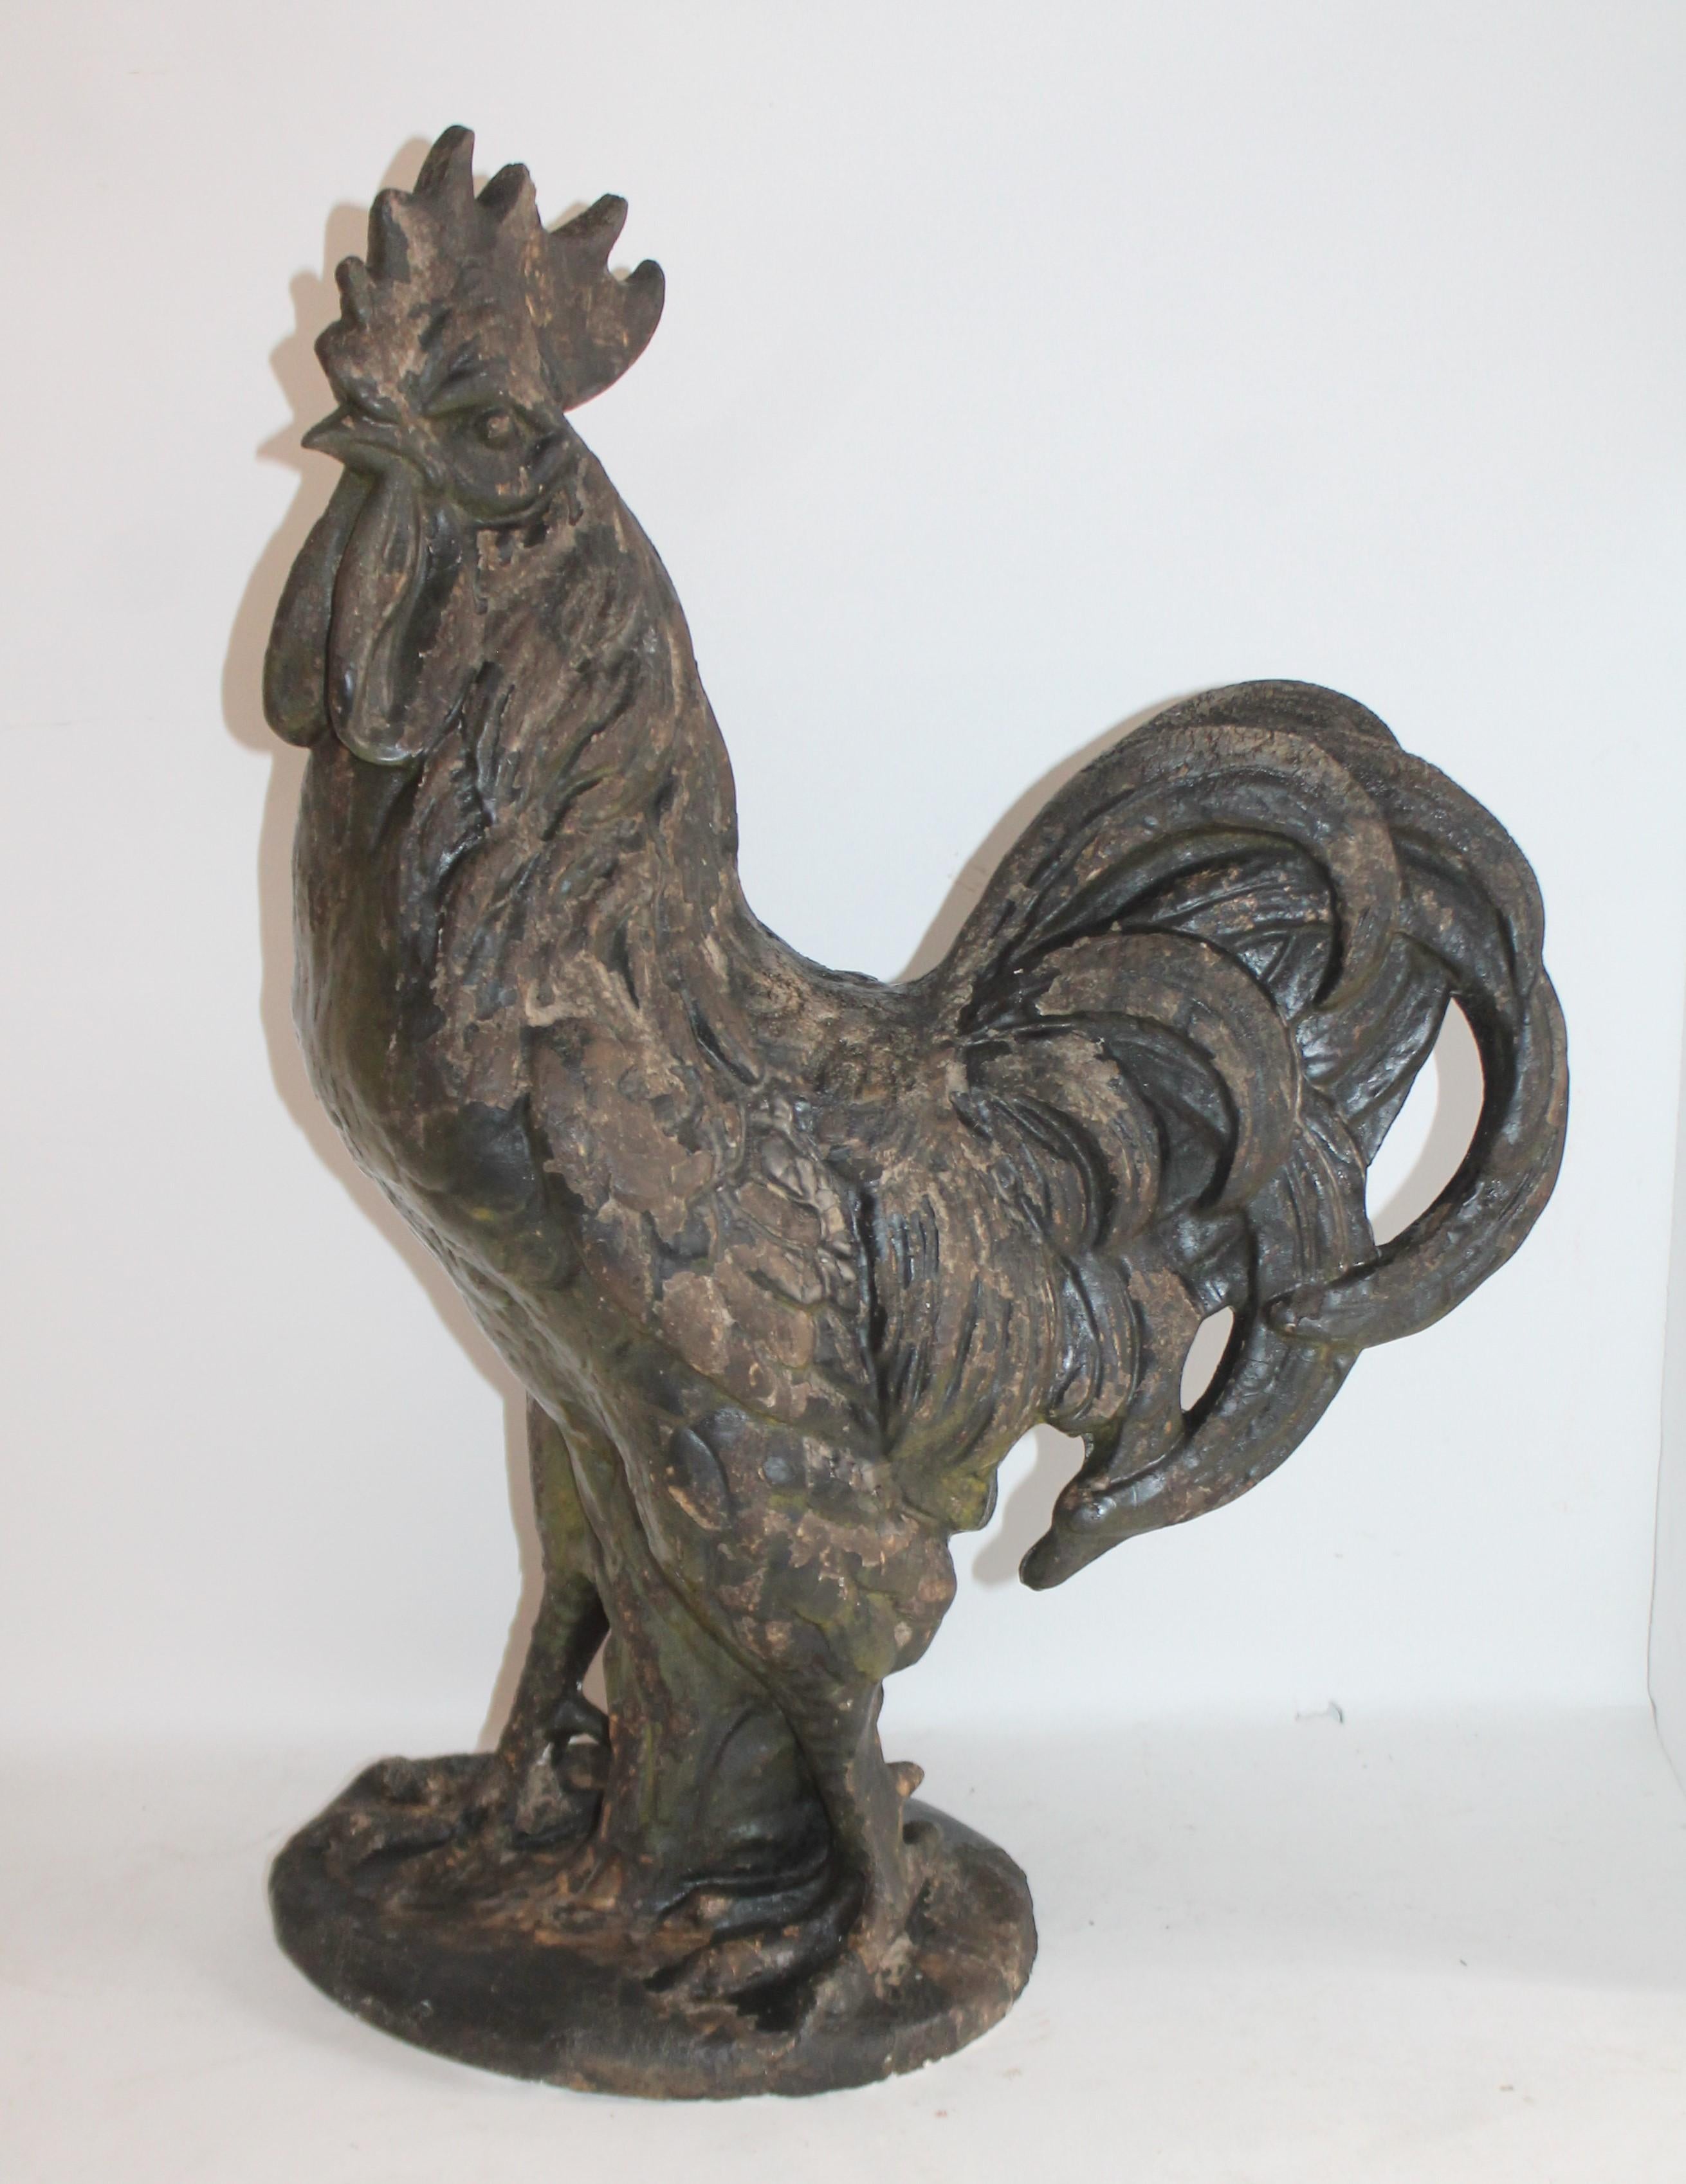 This folky rooster is made of plaster or ceramic and great for a farm porch or yard. It is a heavy distress painted rooster.